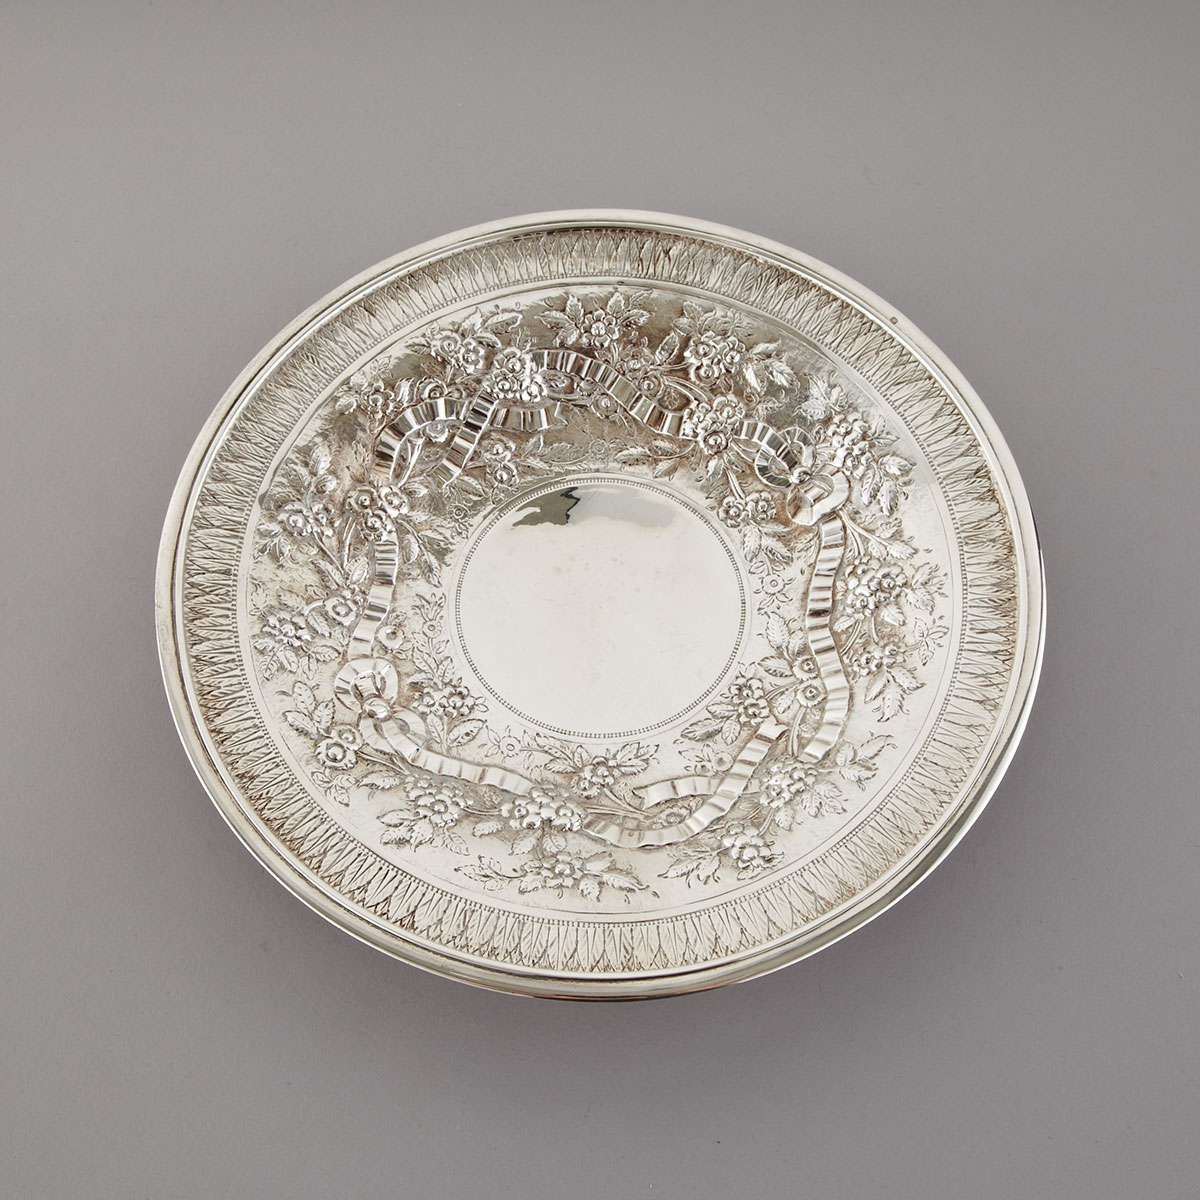 French Silver Cake Plate, Paris, c.1900